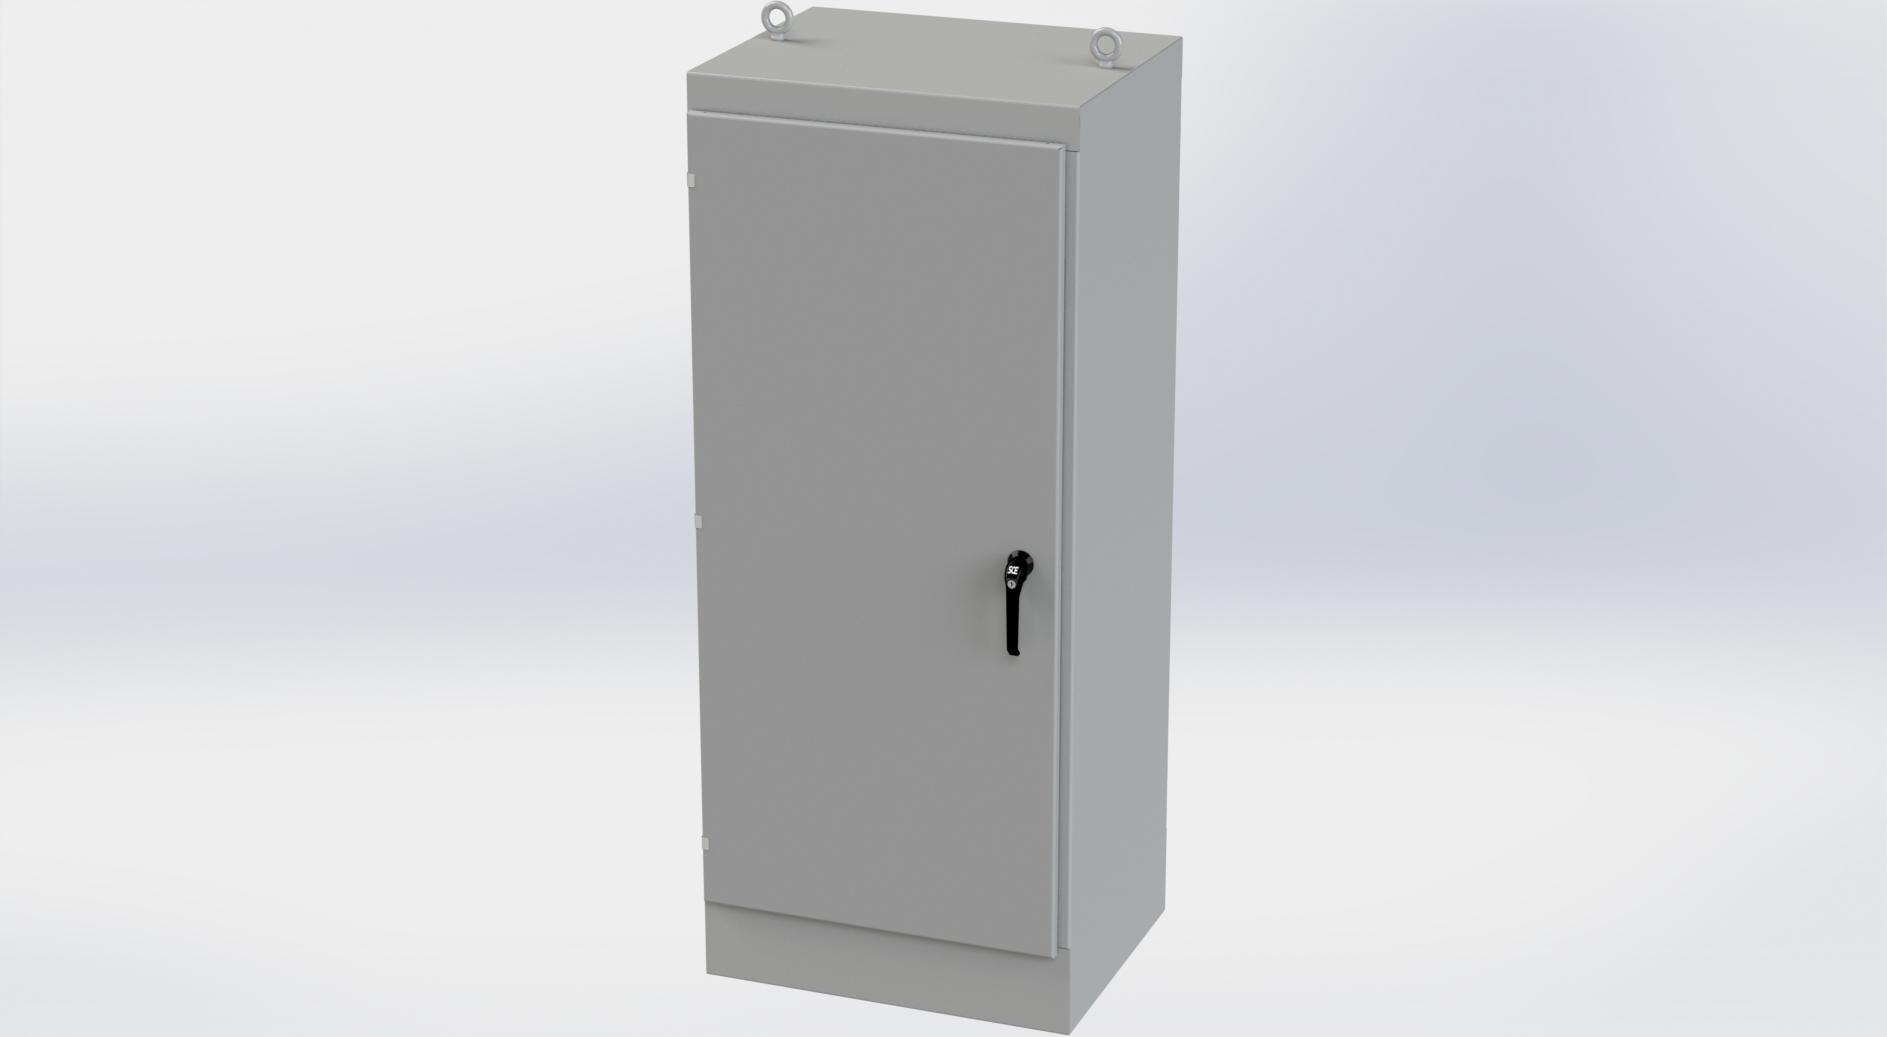 Saginaw Control SCE-72EL3024FSDA FSDA Enclosure, Height:72.00", Width:30.00", Depth:24.00", ANSI-61 gray powder coat inside and out. Optional sub-panels are powder coated white.